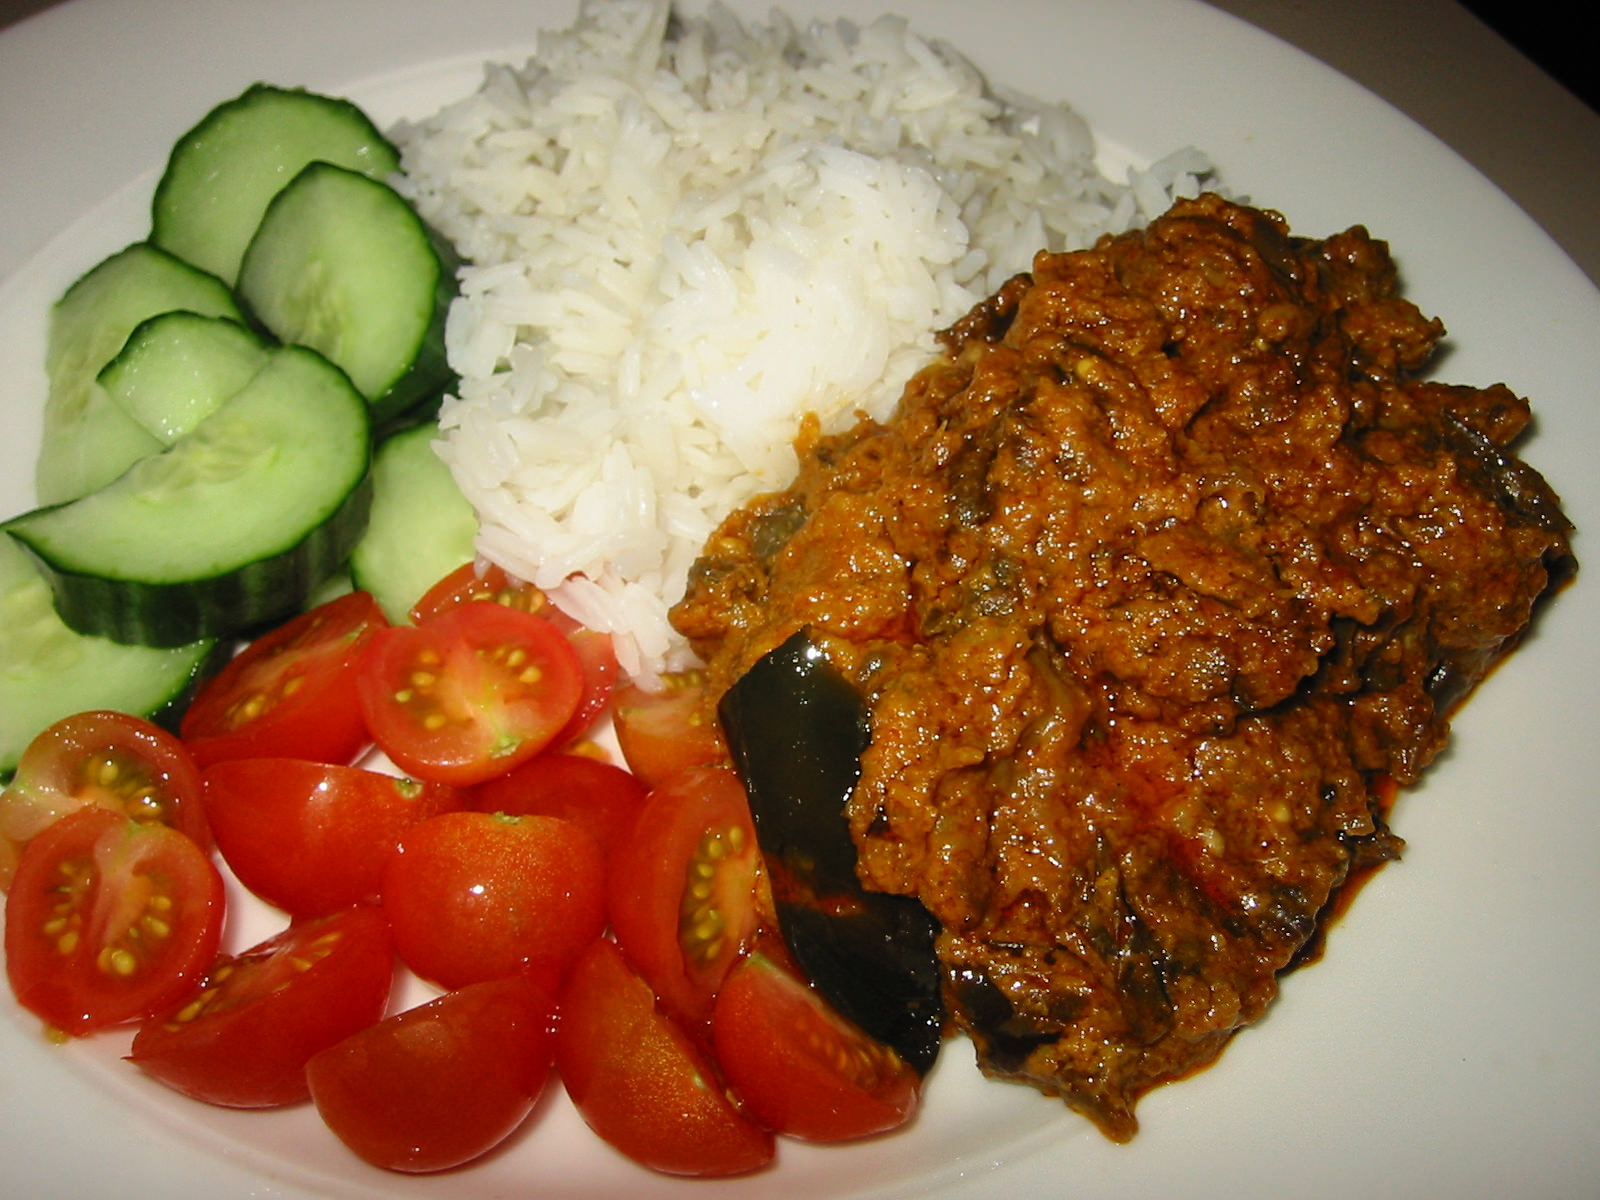 Leftover brinjal bhaji with rice, fresh tomatoes and cucumber